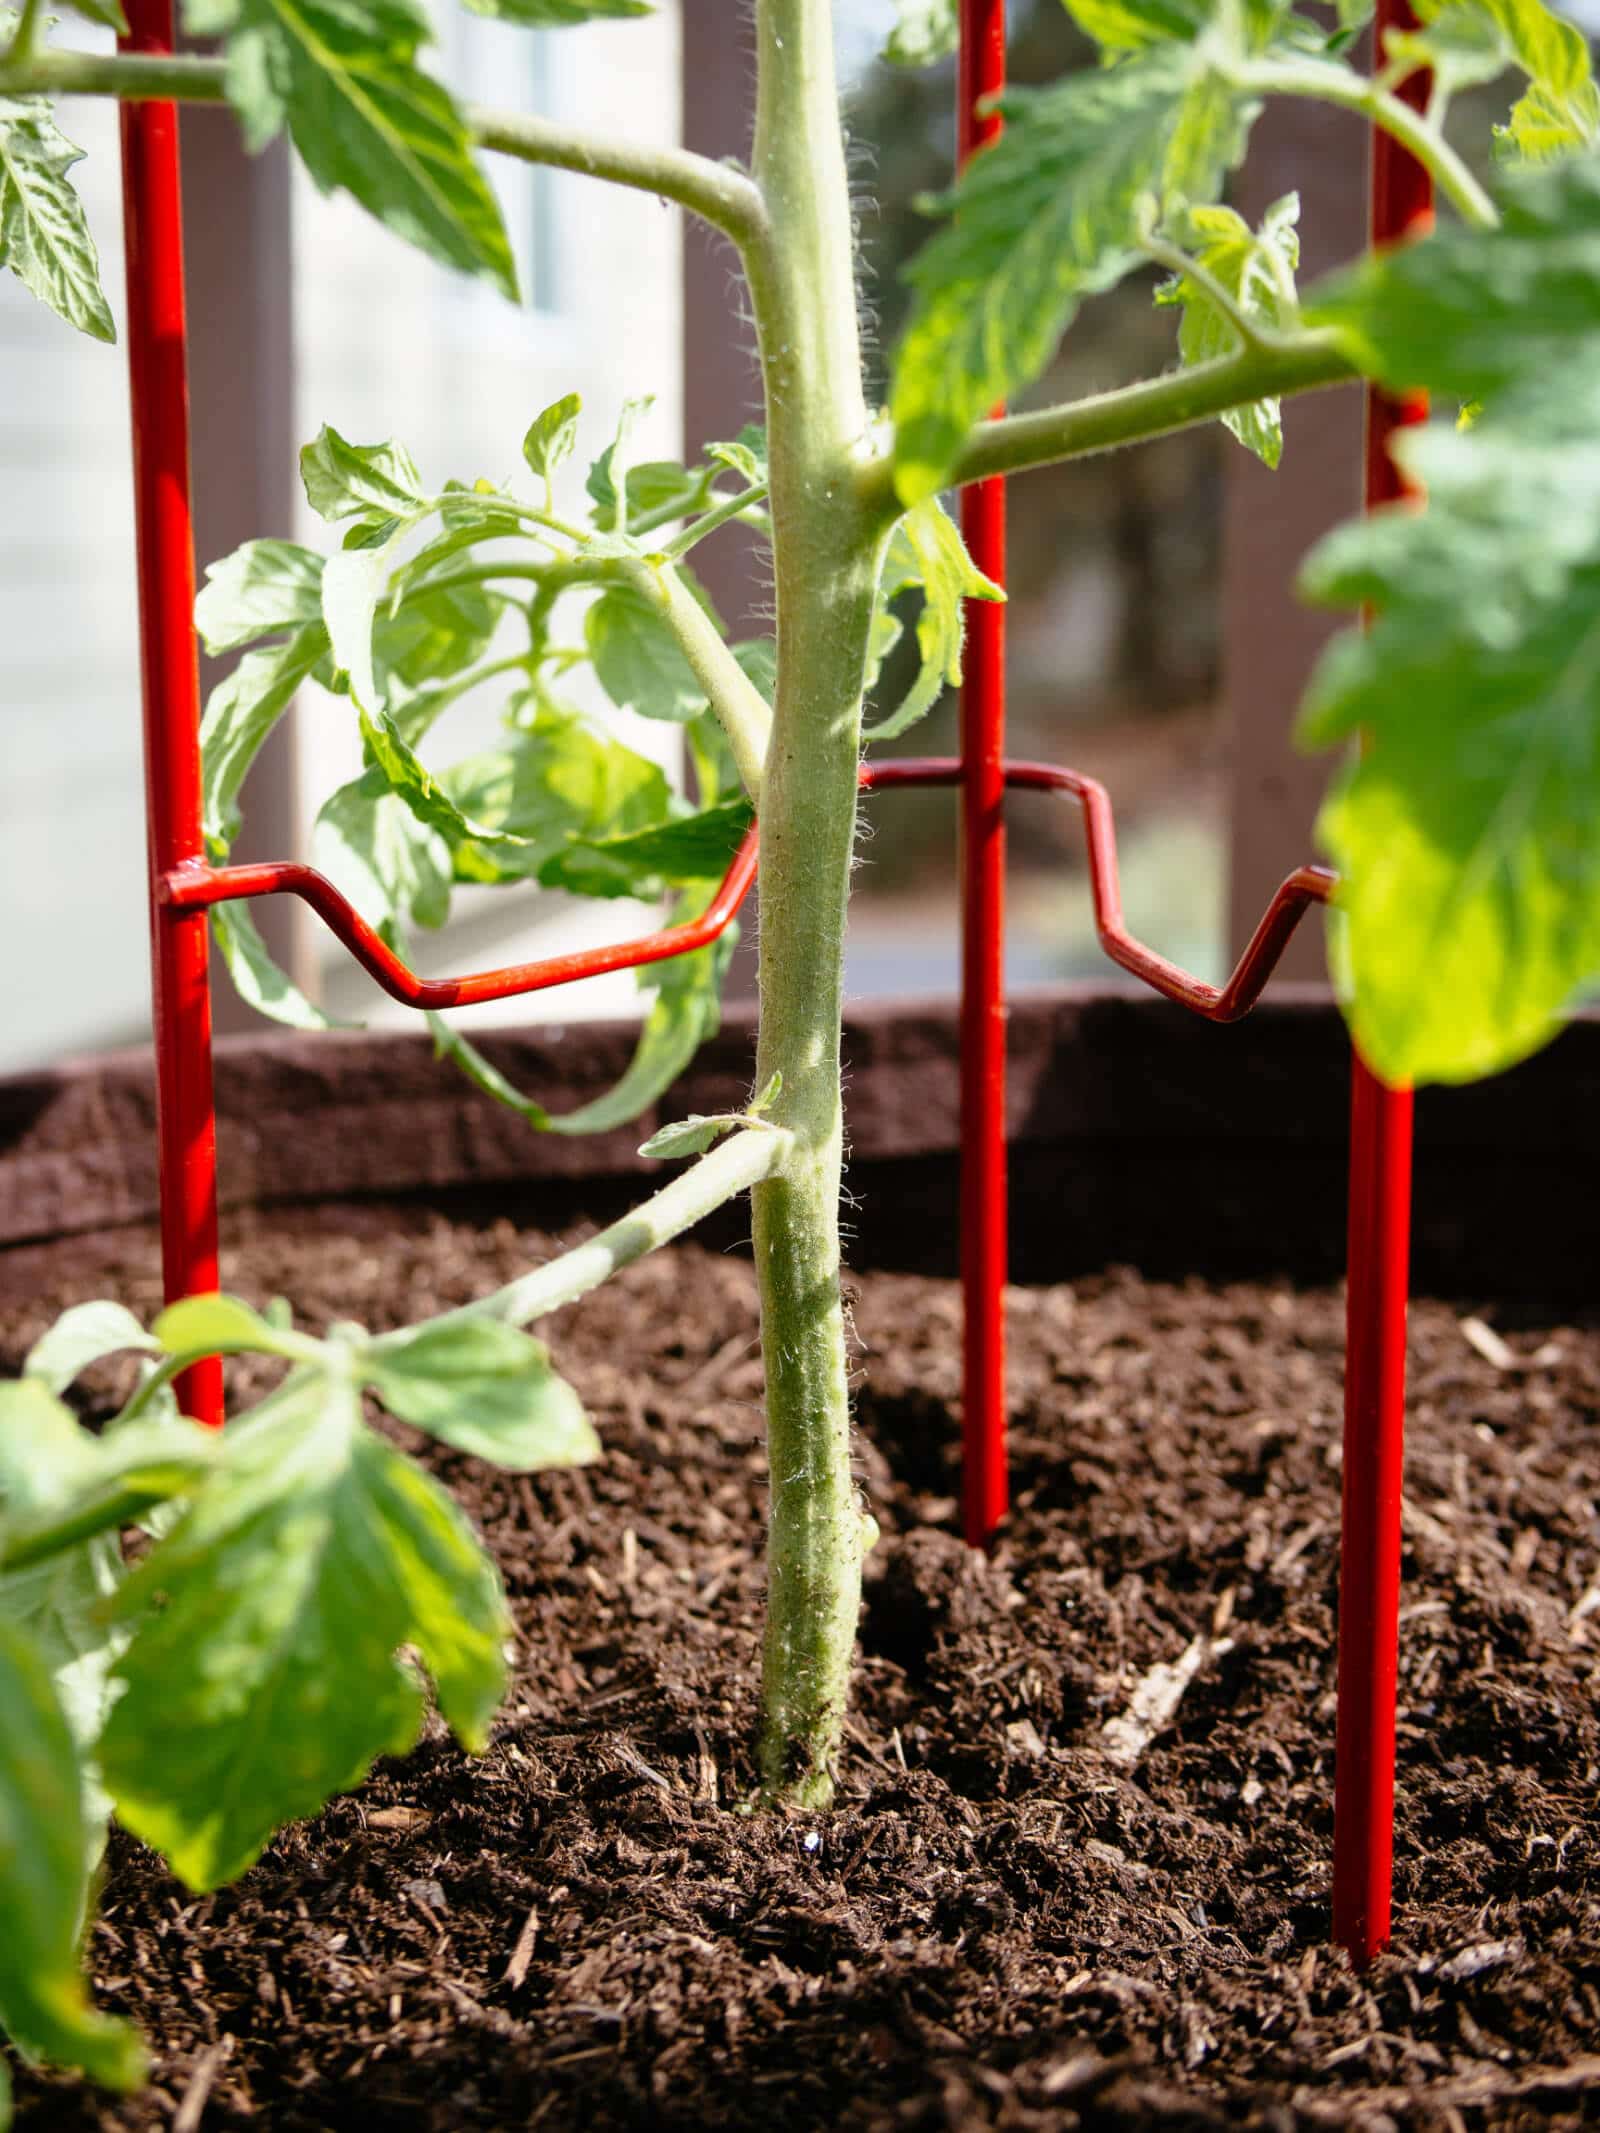 Stake tomato plants early to avoid damaging roots